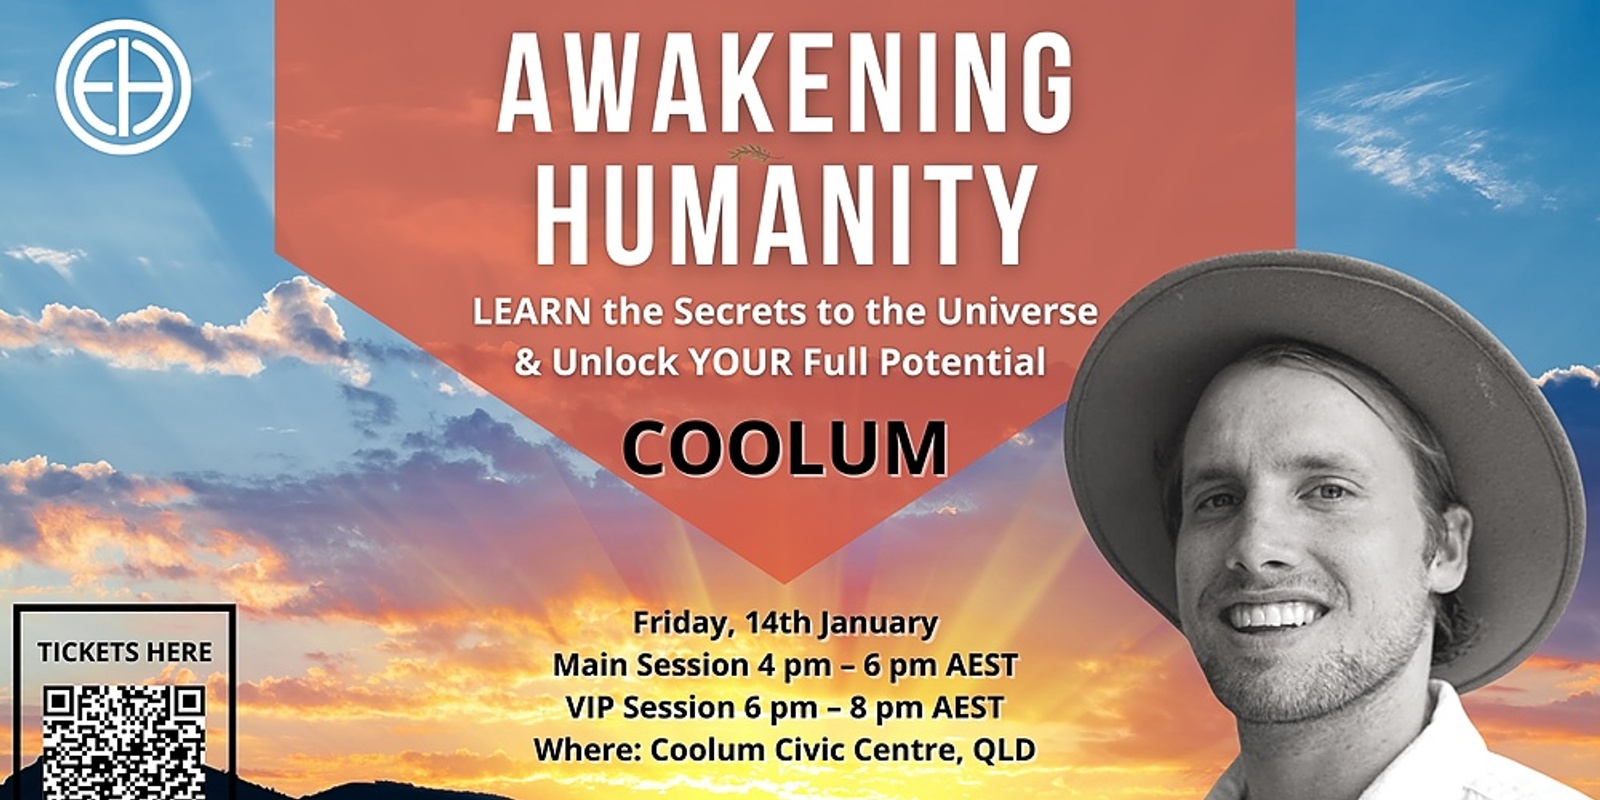 Banner image for AWAKENING HUMANITY - Learn the Secrets to the Universe & Unlock YOUR Full Potential COOLUM